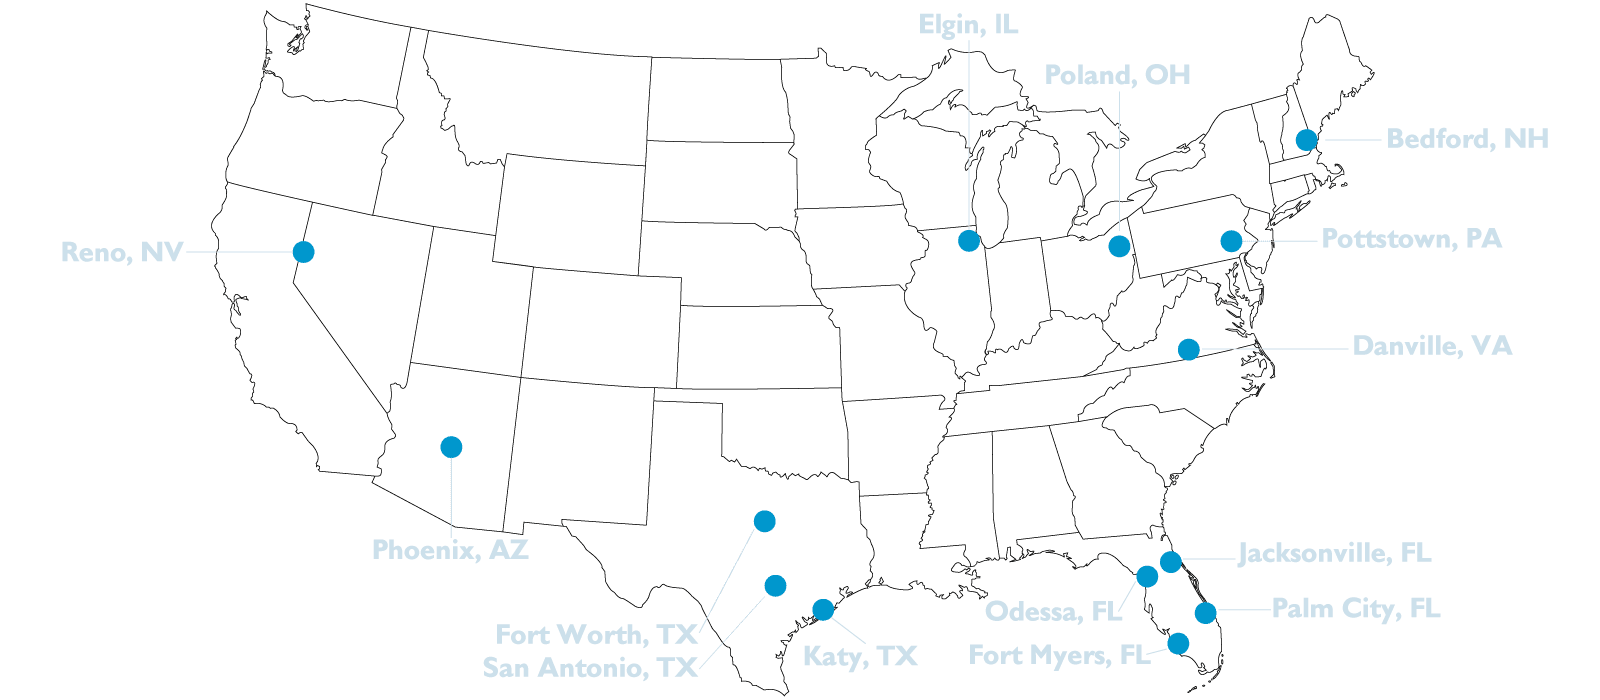 Charger locations with cities